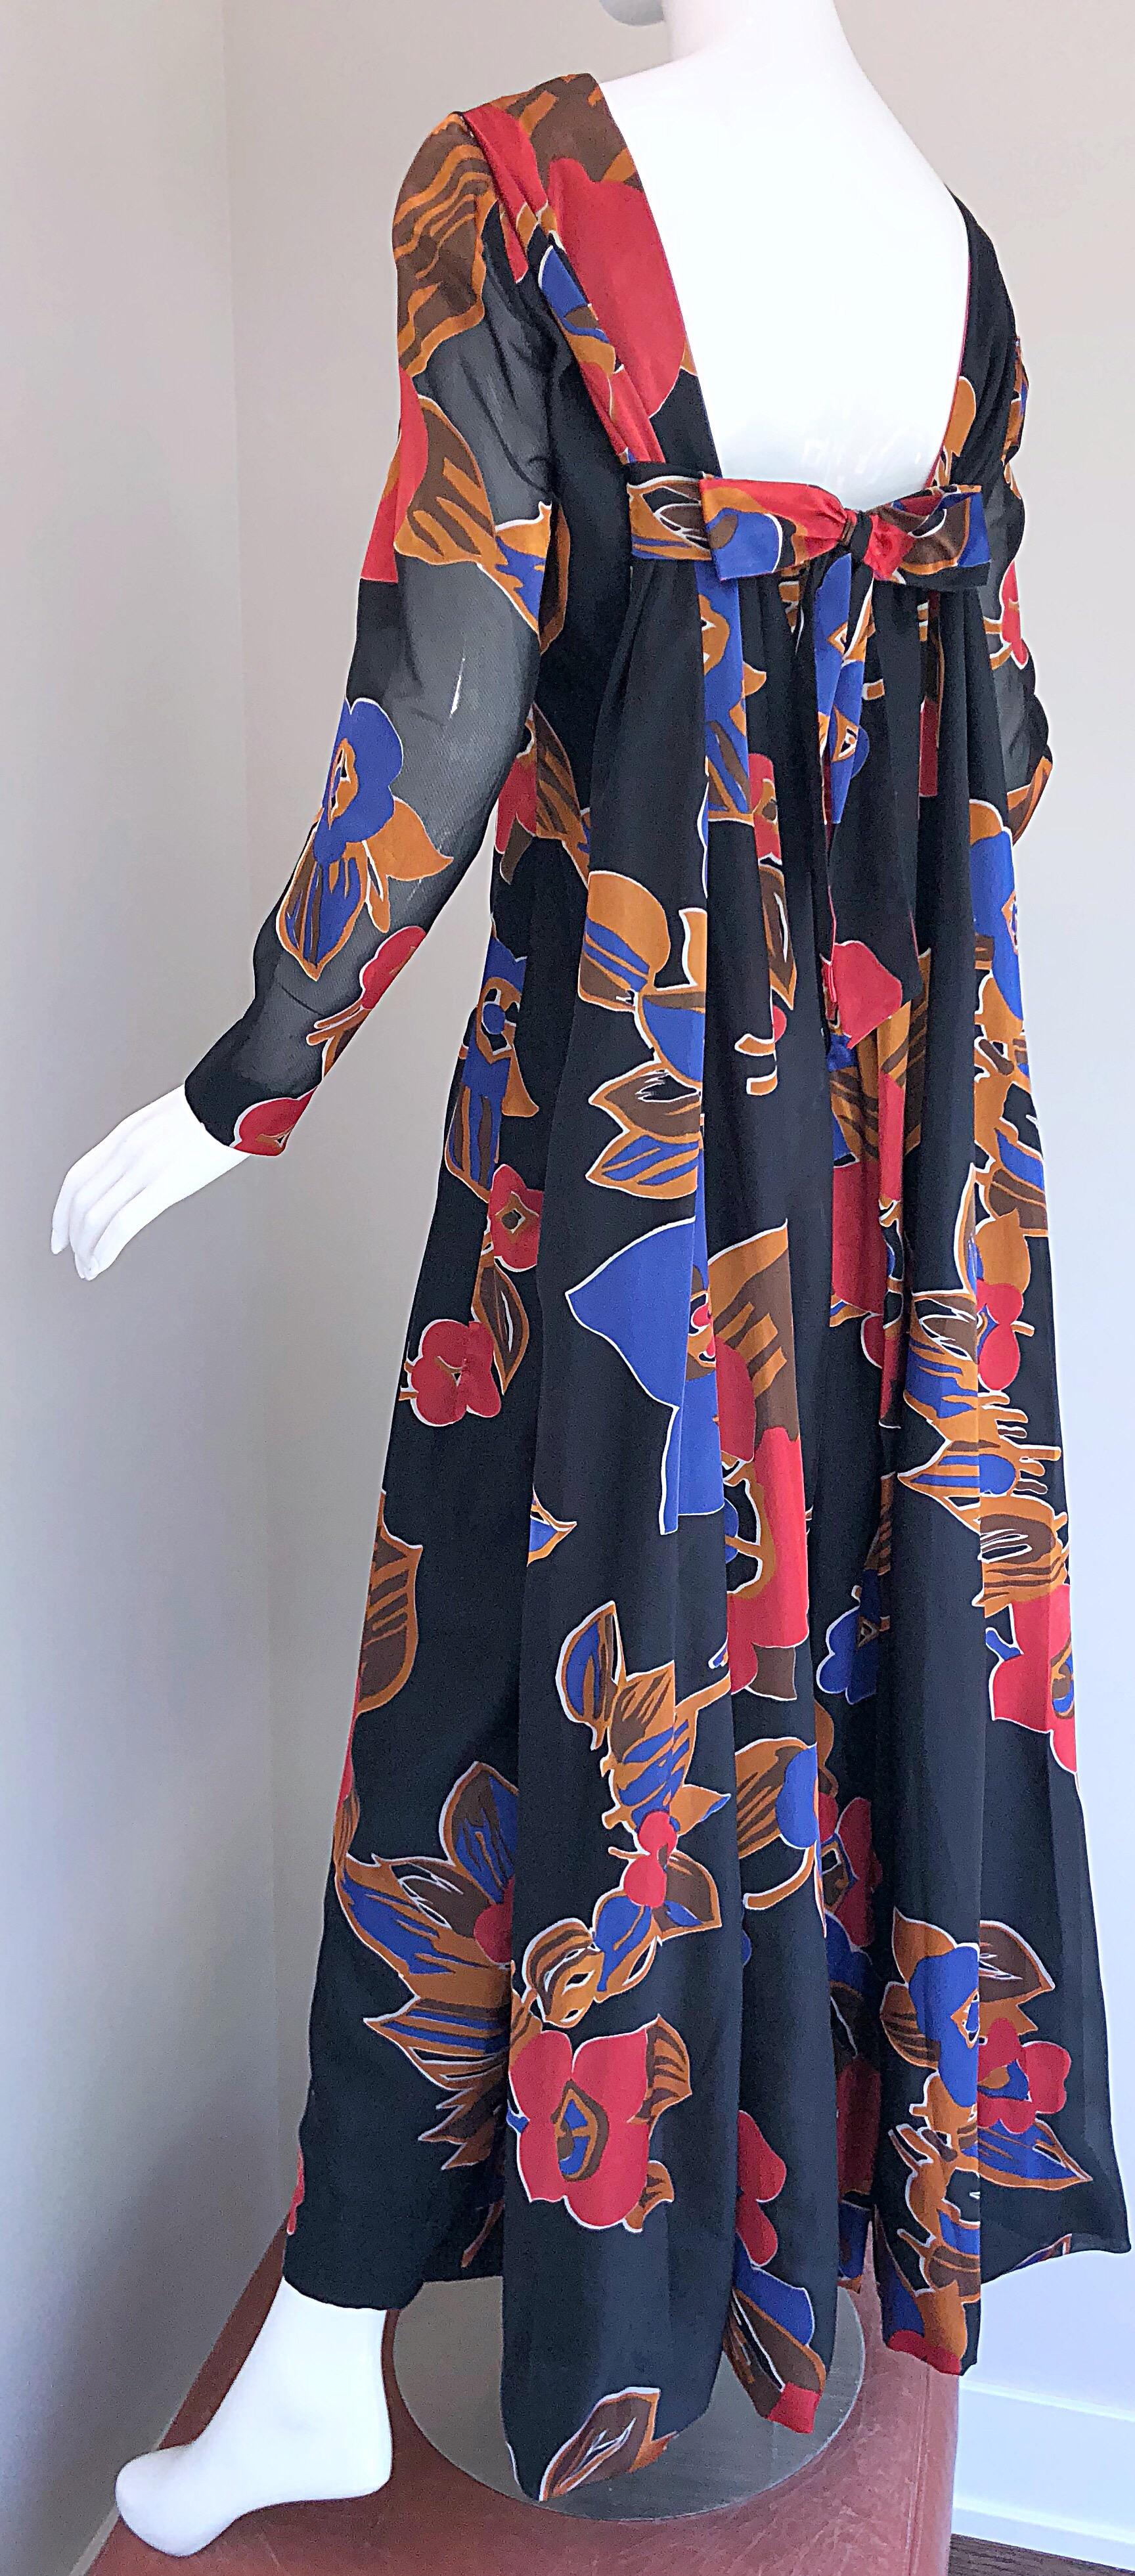 1960s John Boyle Bishop Black + Brown + Red Abstract Trained 60s Gown Maxi Dress For Sale 9